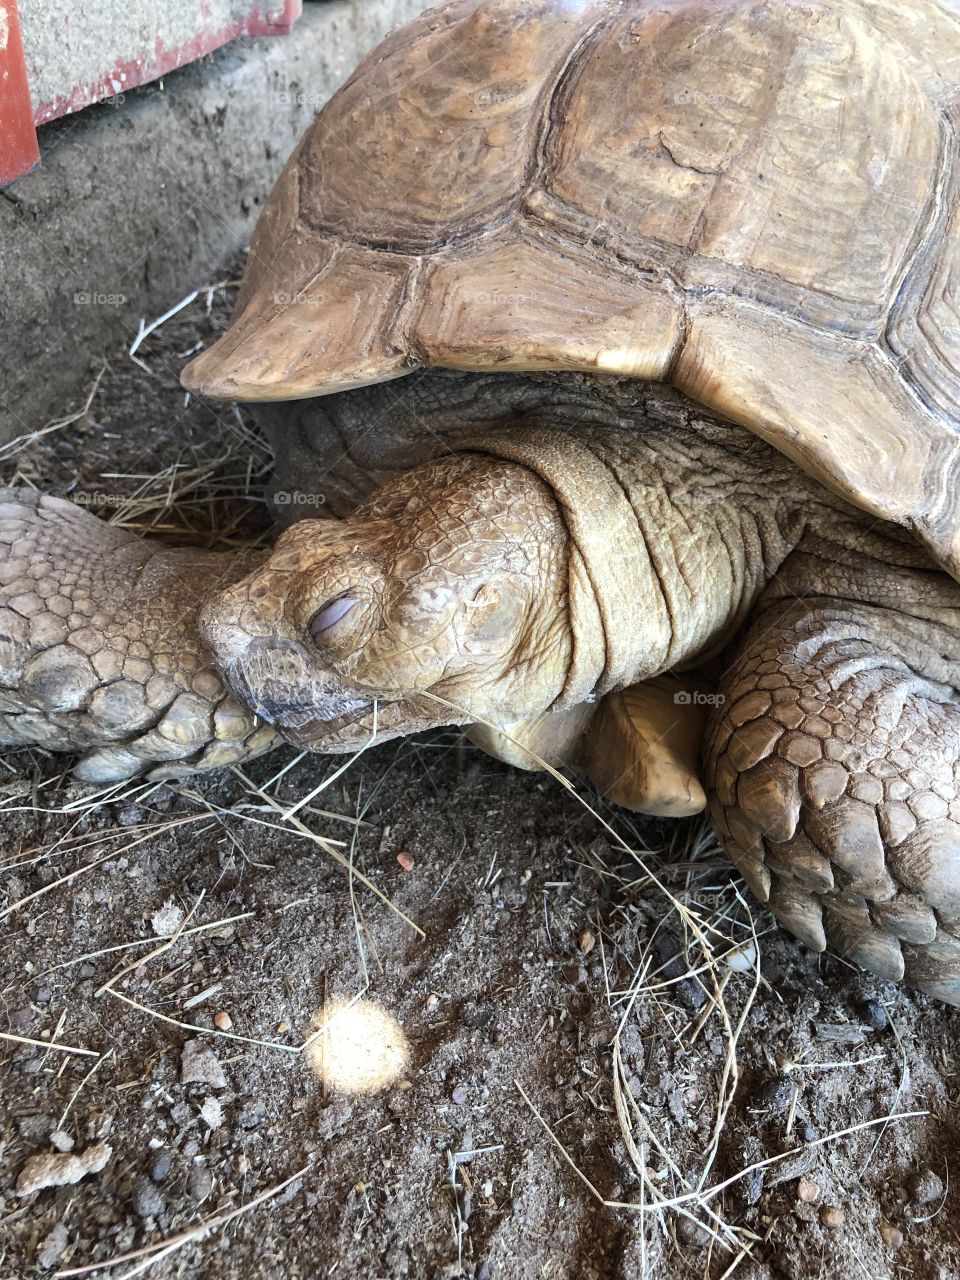 This huge tortoise isn’t very intimidating when it’s fast asleep!